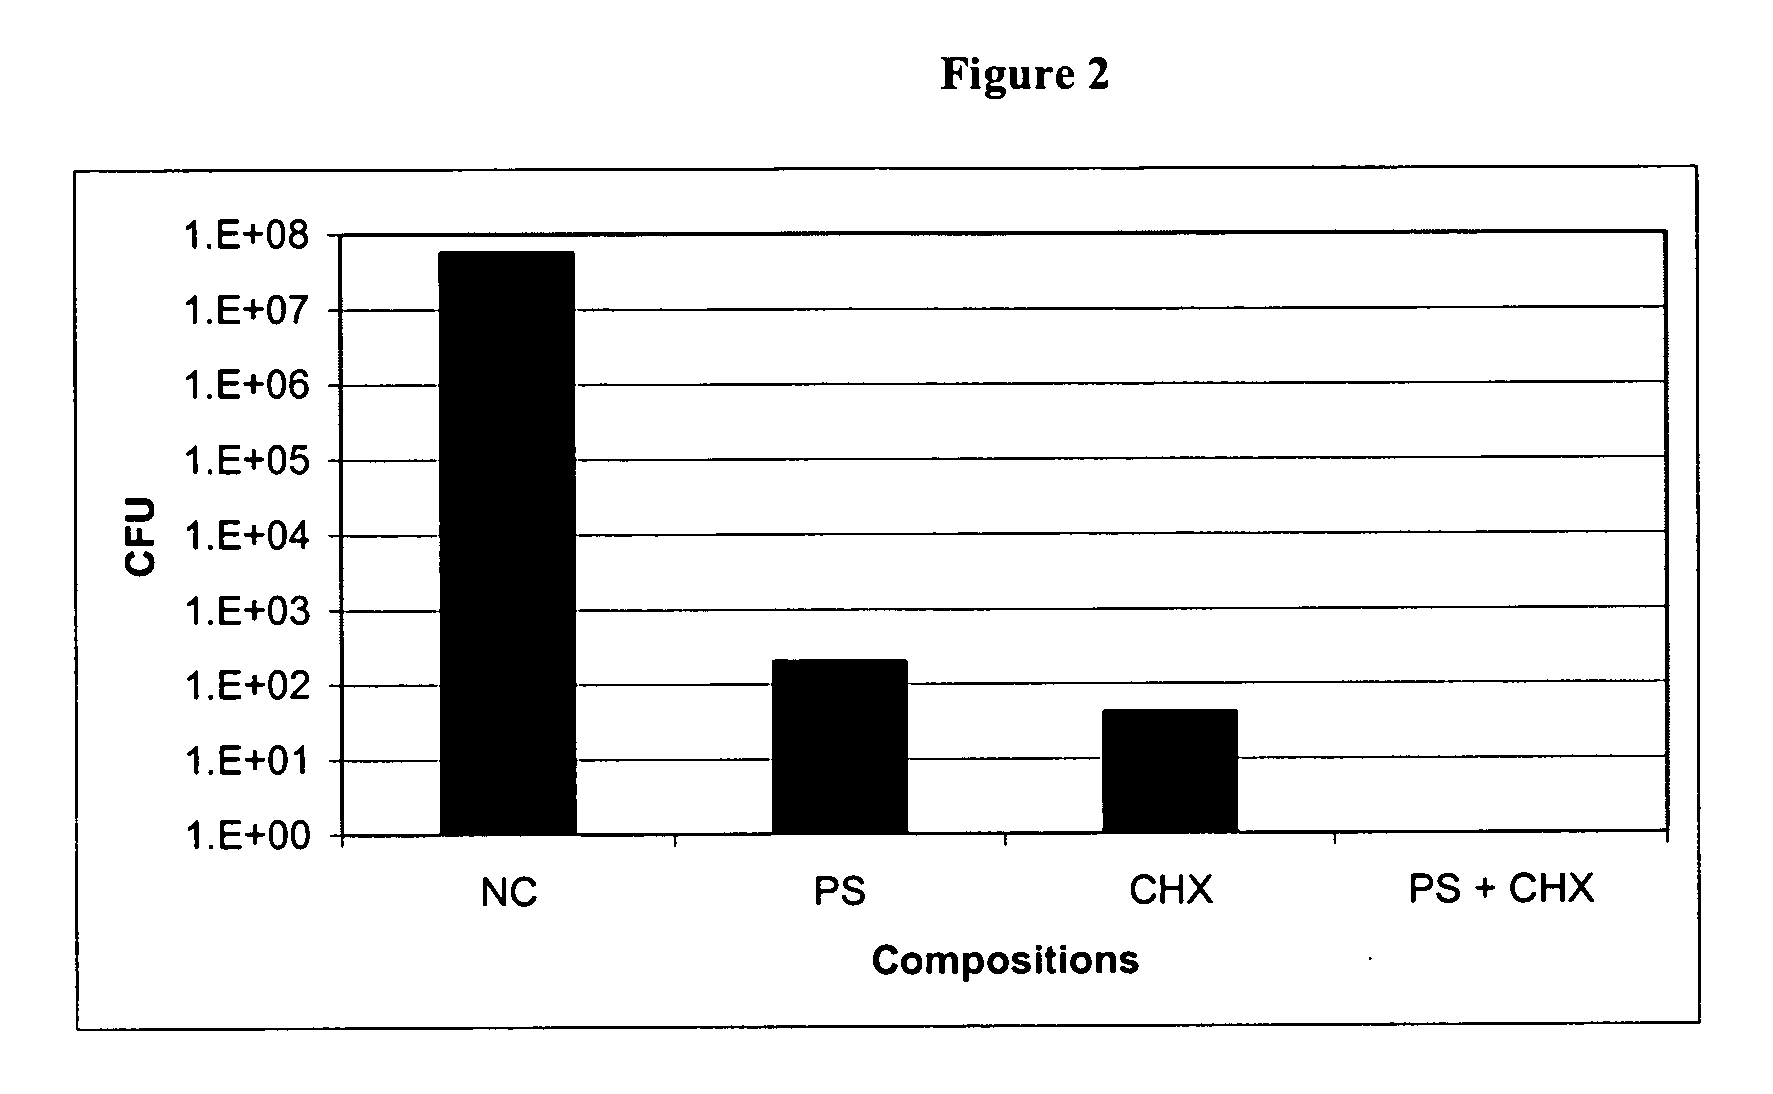 Antimicrobial compositions and uses thereof